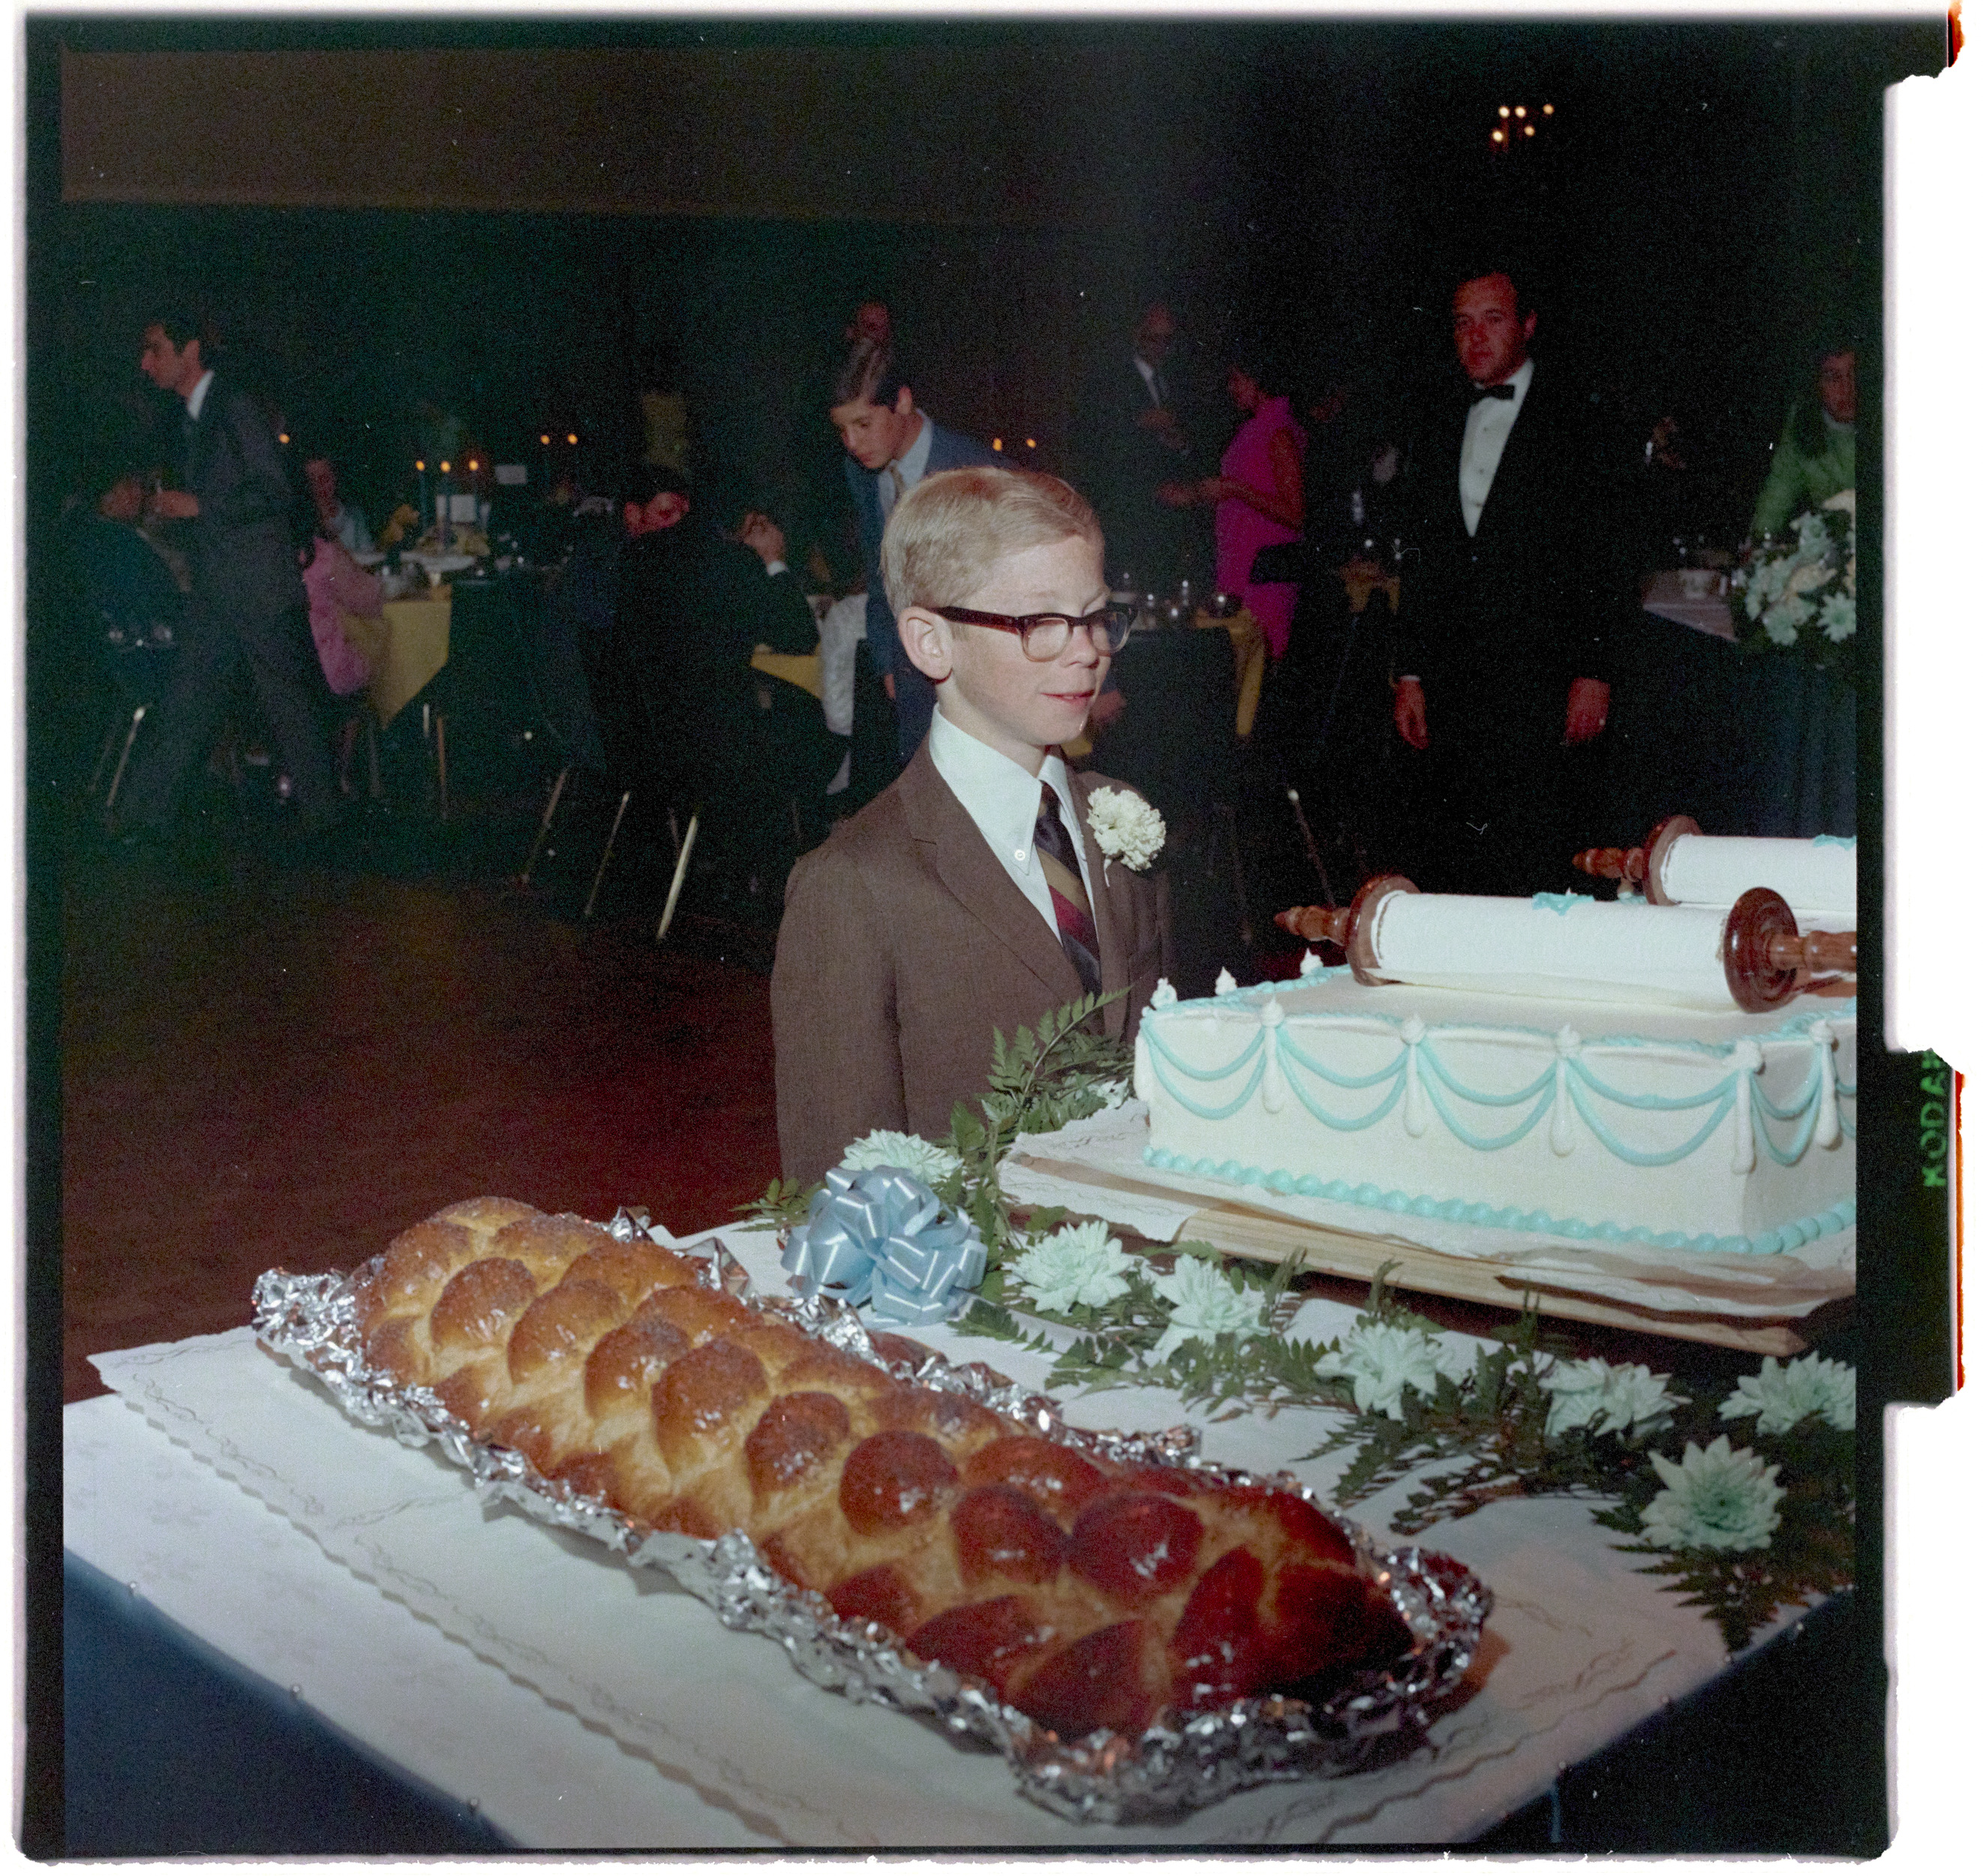 Photographs of Andrew Levy Bar Mitzvah, image 05